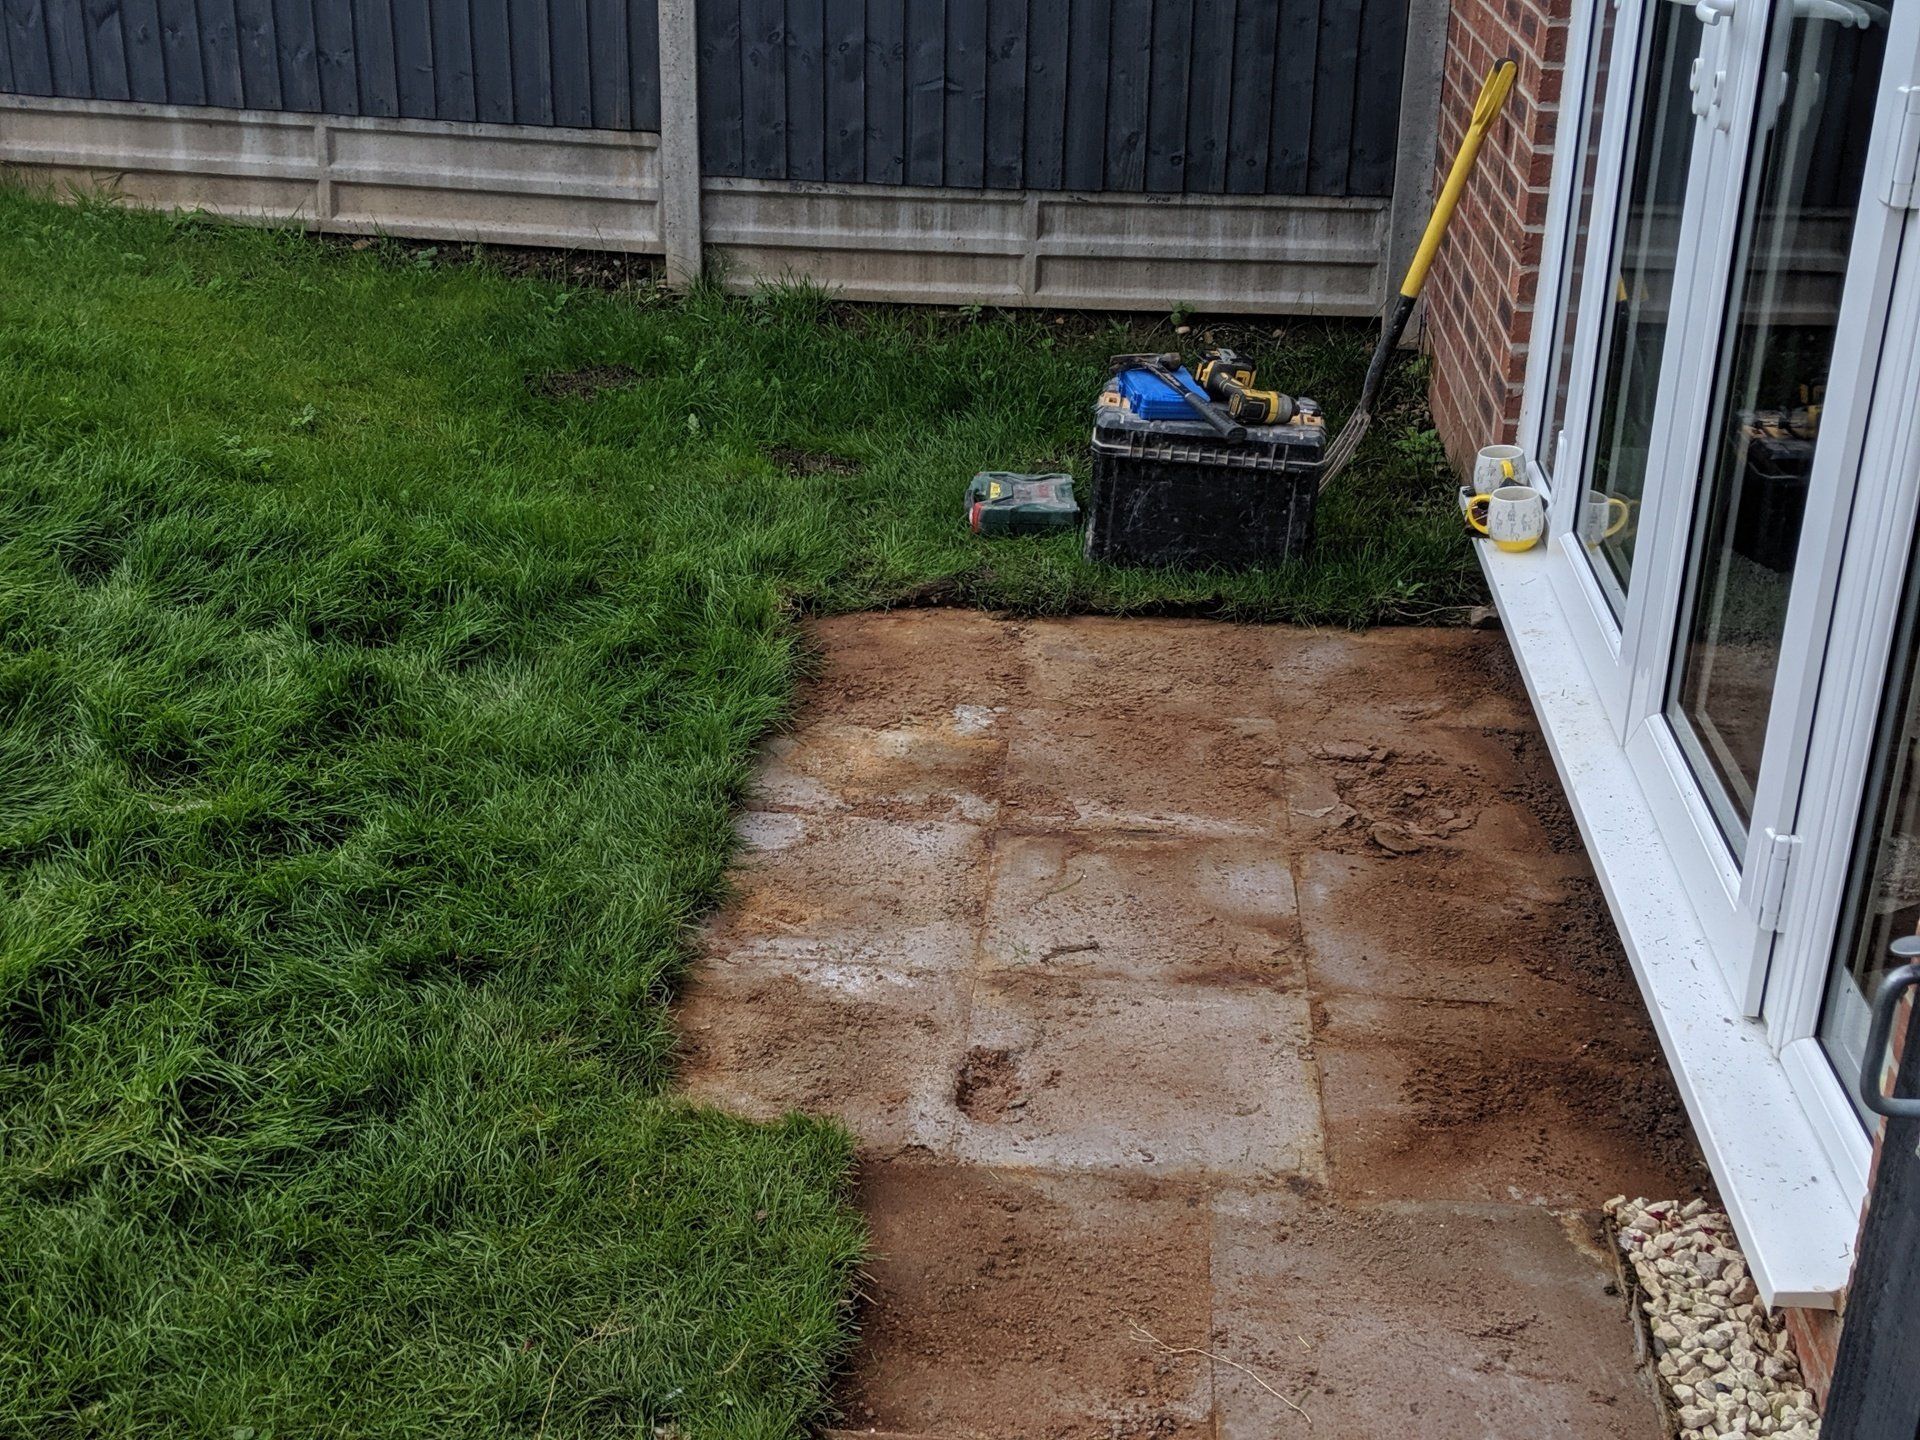 Patio and railway sleepers in Dudley September 2020